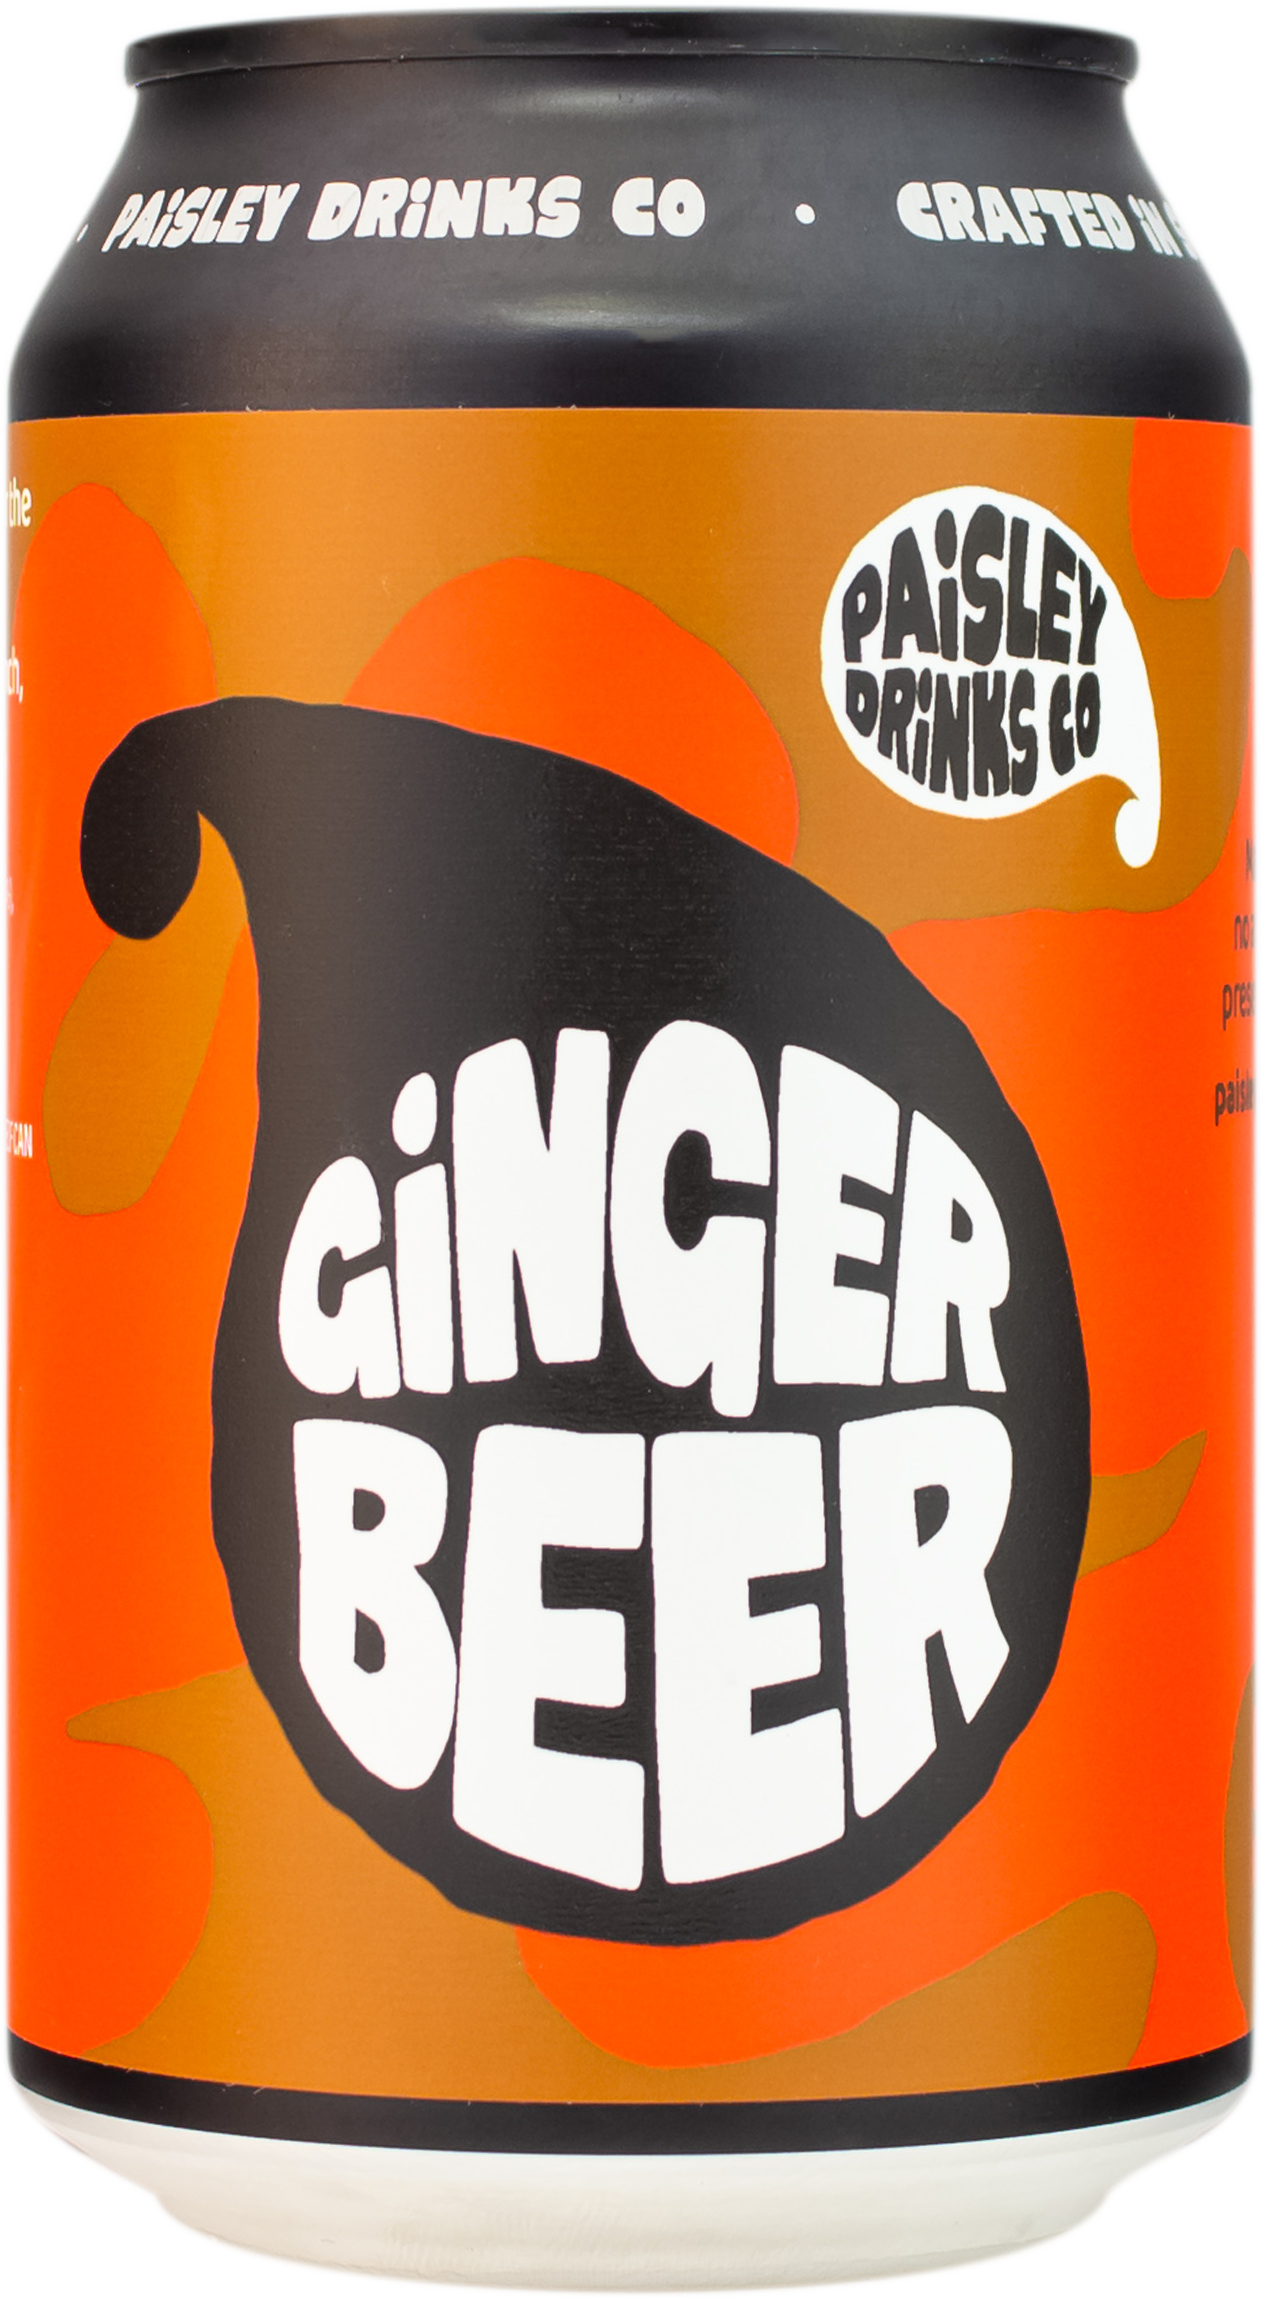 Paisley Drinks Co - Ginger Beer